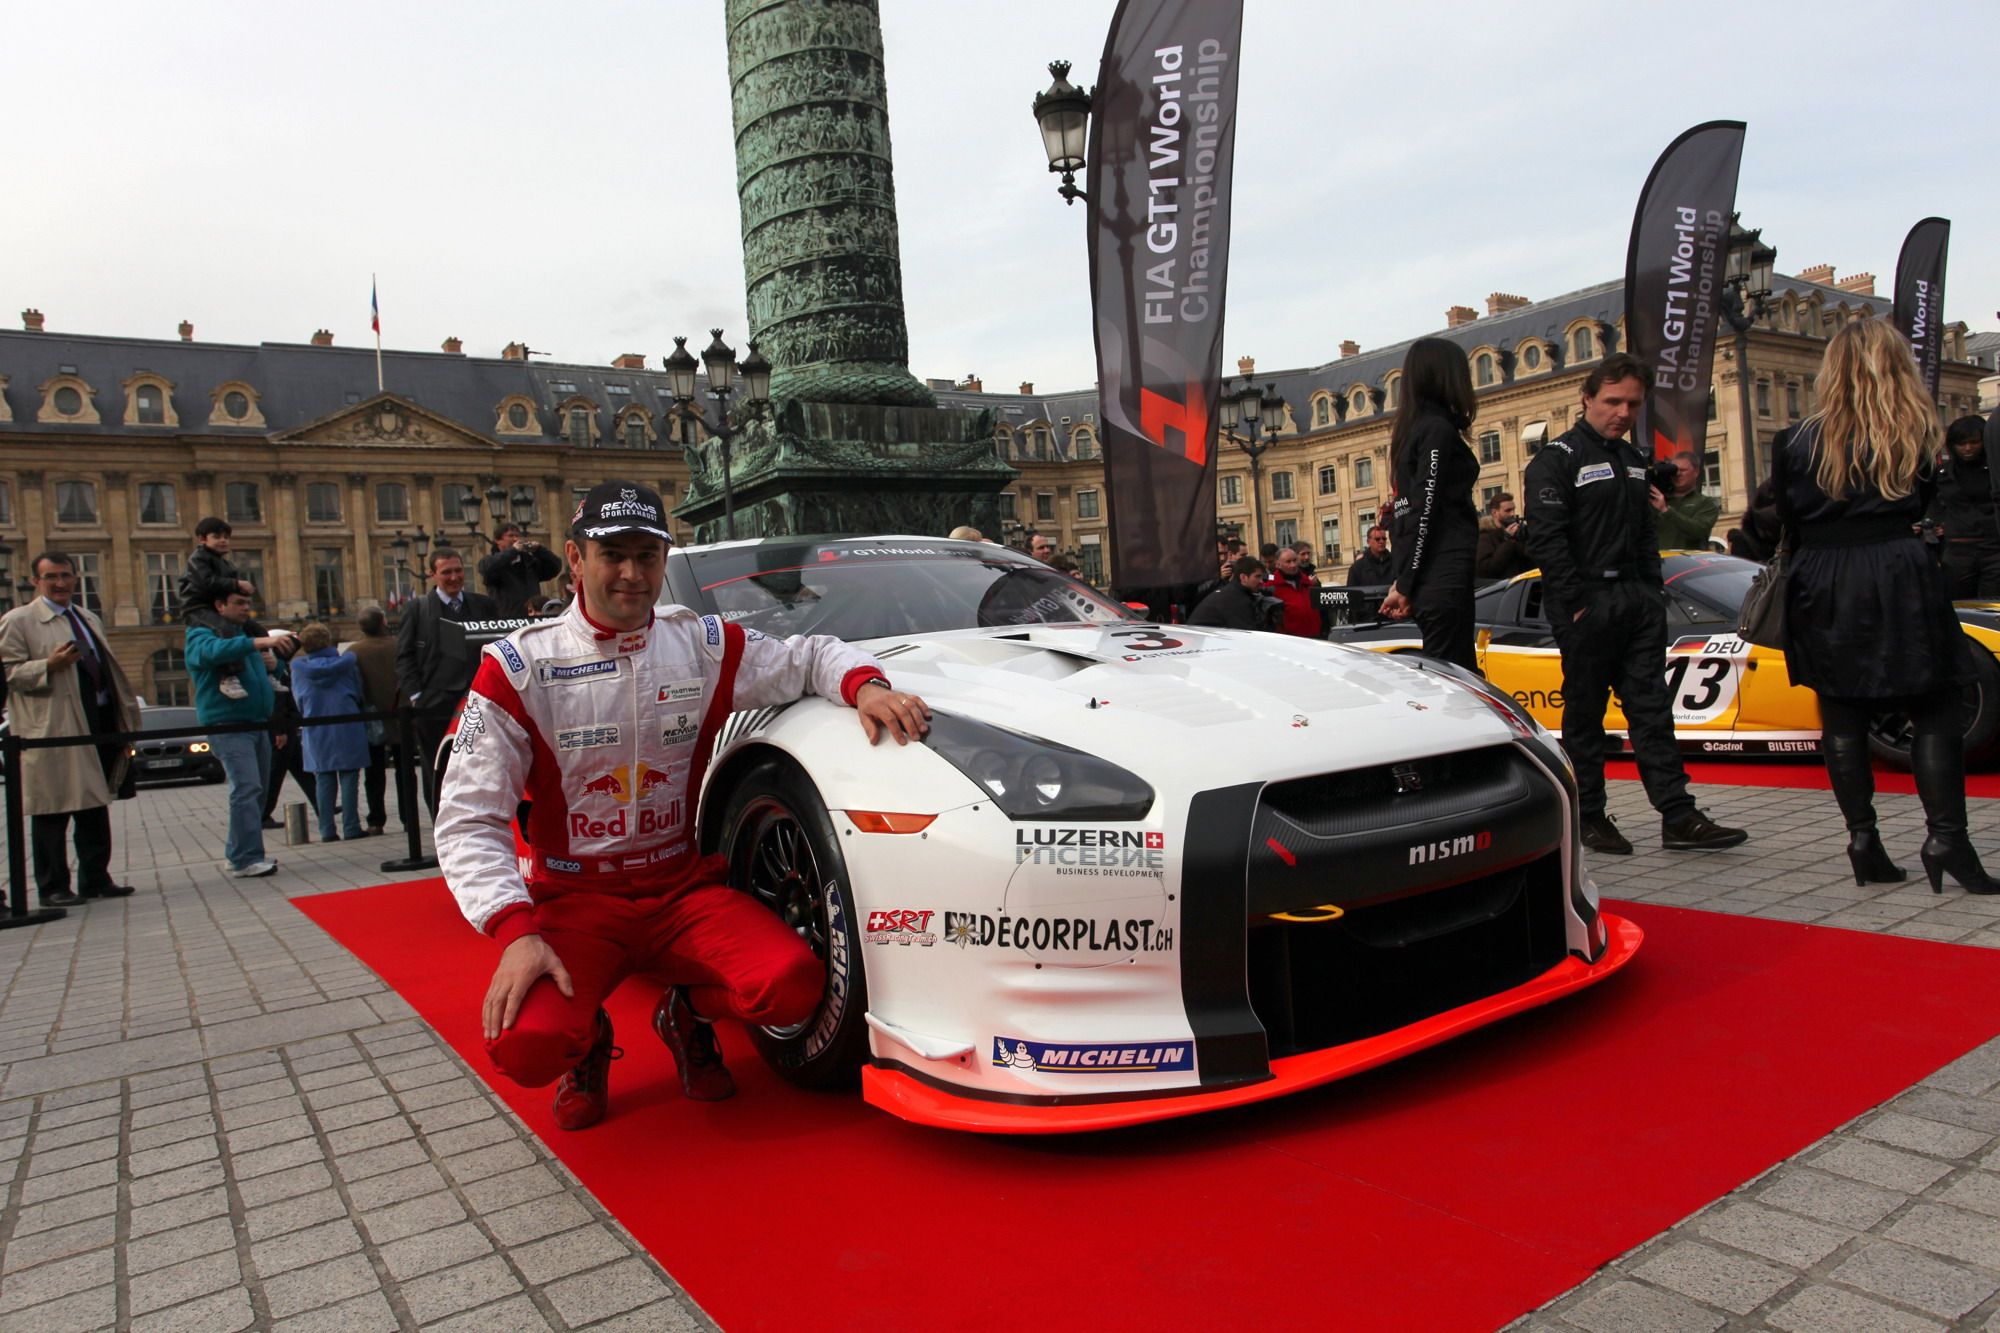 2010 Nissan GT-R from Sumo Power GT and Swiss Racing Team